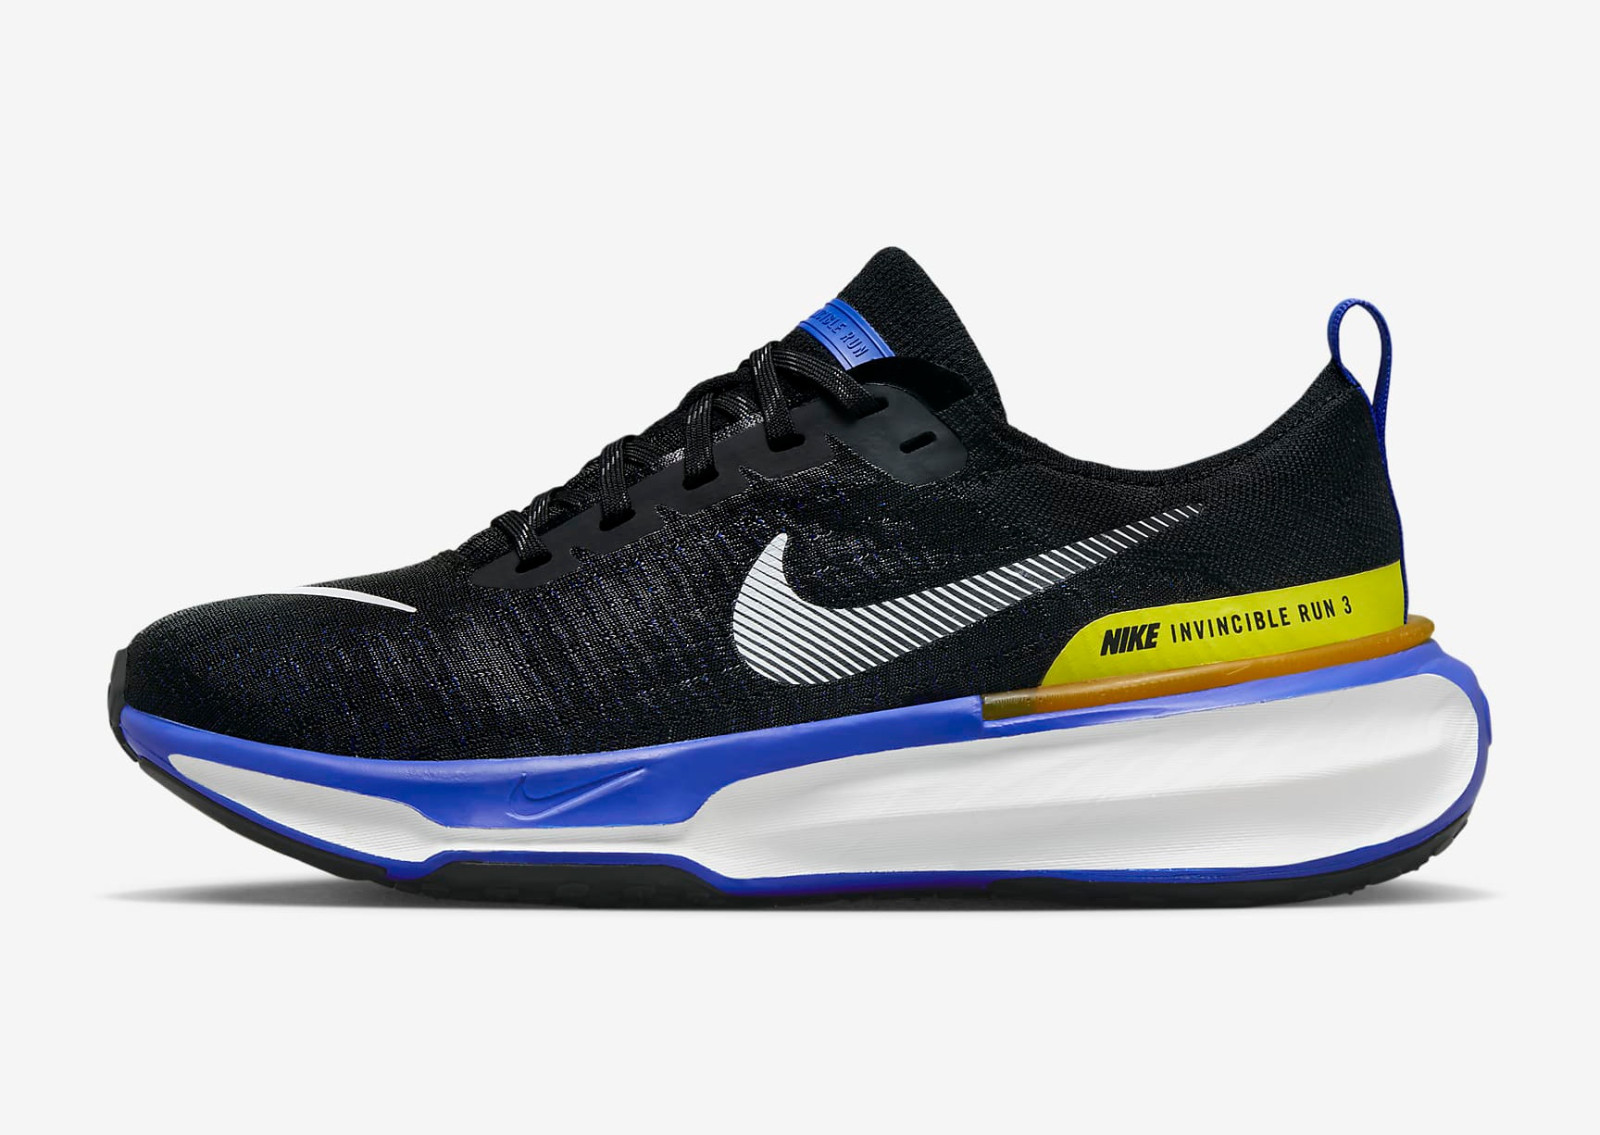 MultiscaleconsultingShops - Nike Invincible Run Flyknit 3 Black Racer Blue High Voltage DR2615 - 003 - nike air max fitsole 2 wotrue basketball schedule